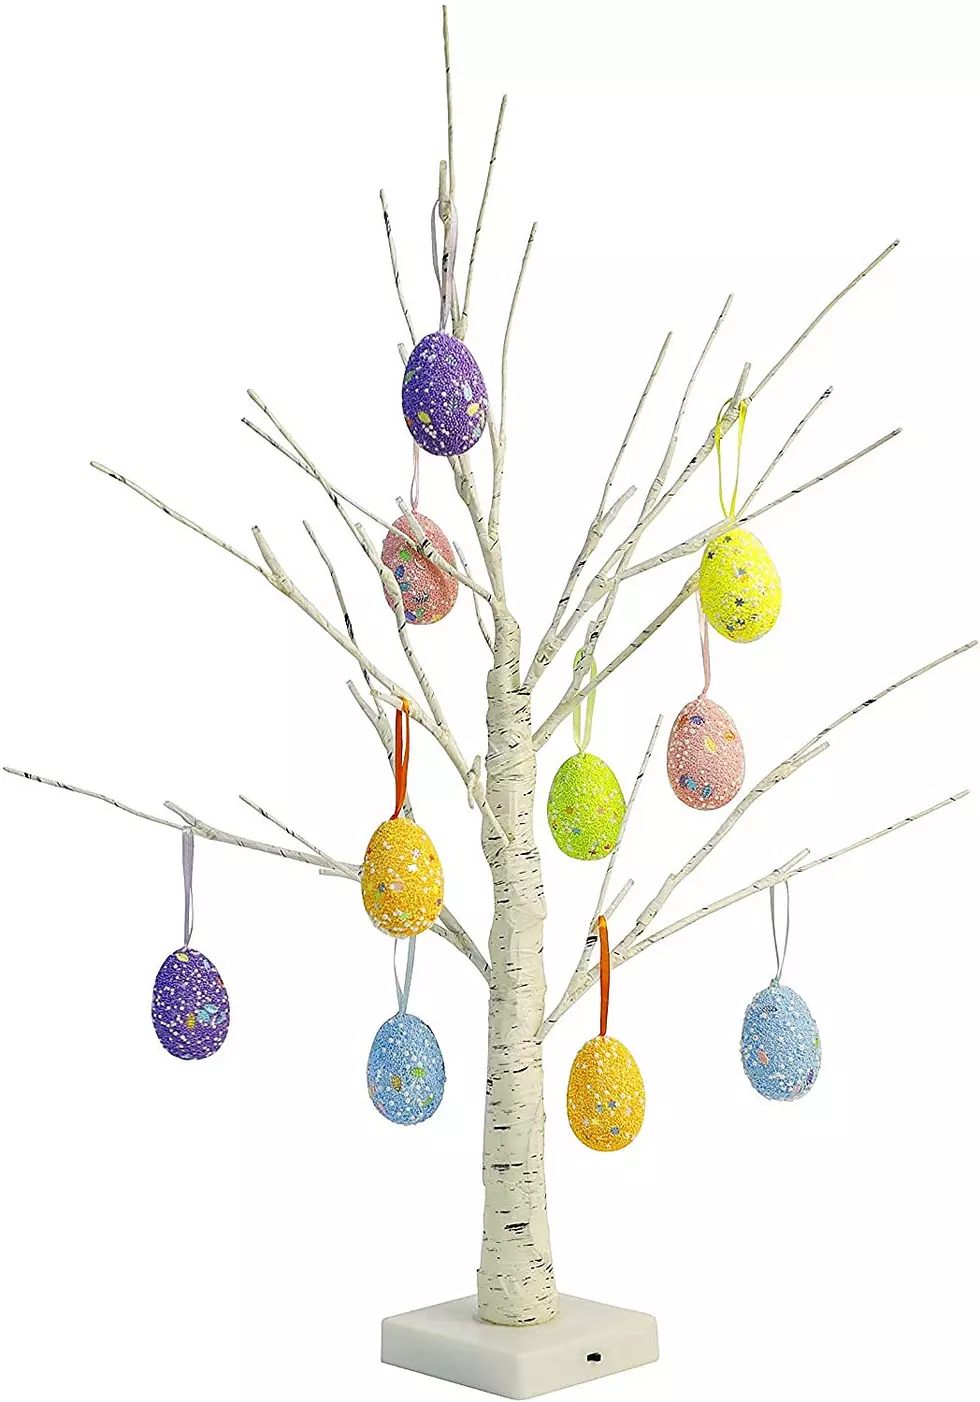 Easter Tree Interest Up 900% – Here’s How to Get 1 in Rochester (or How to Make Them)